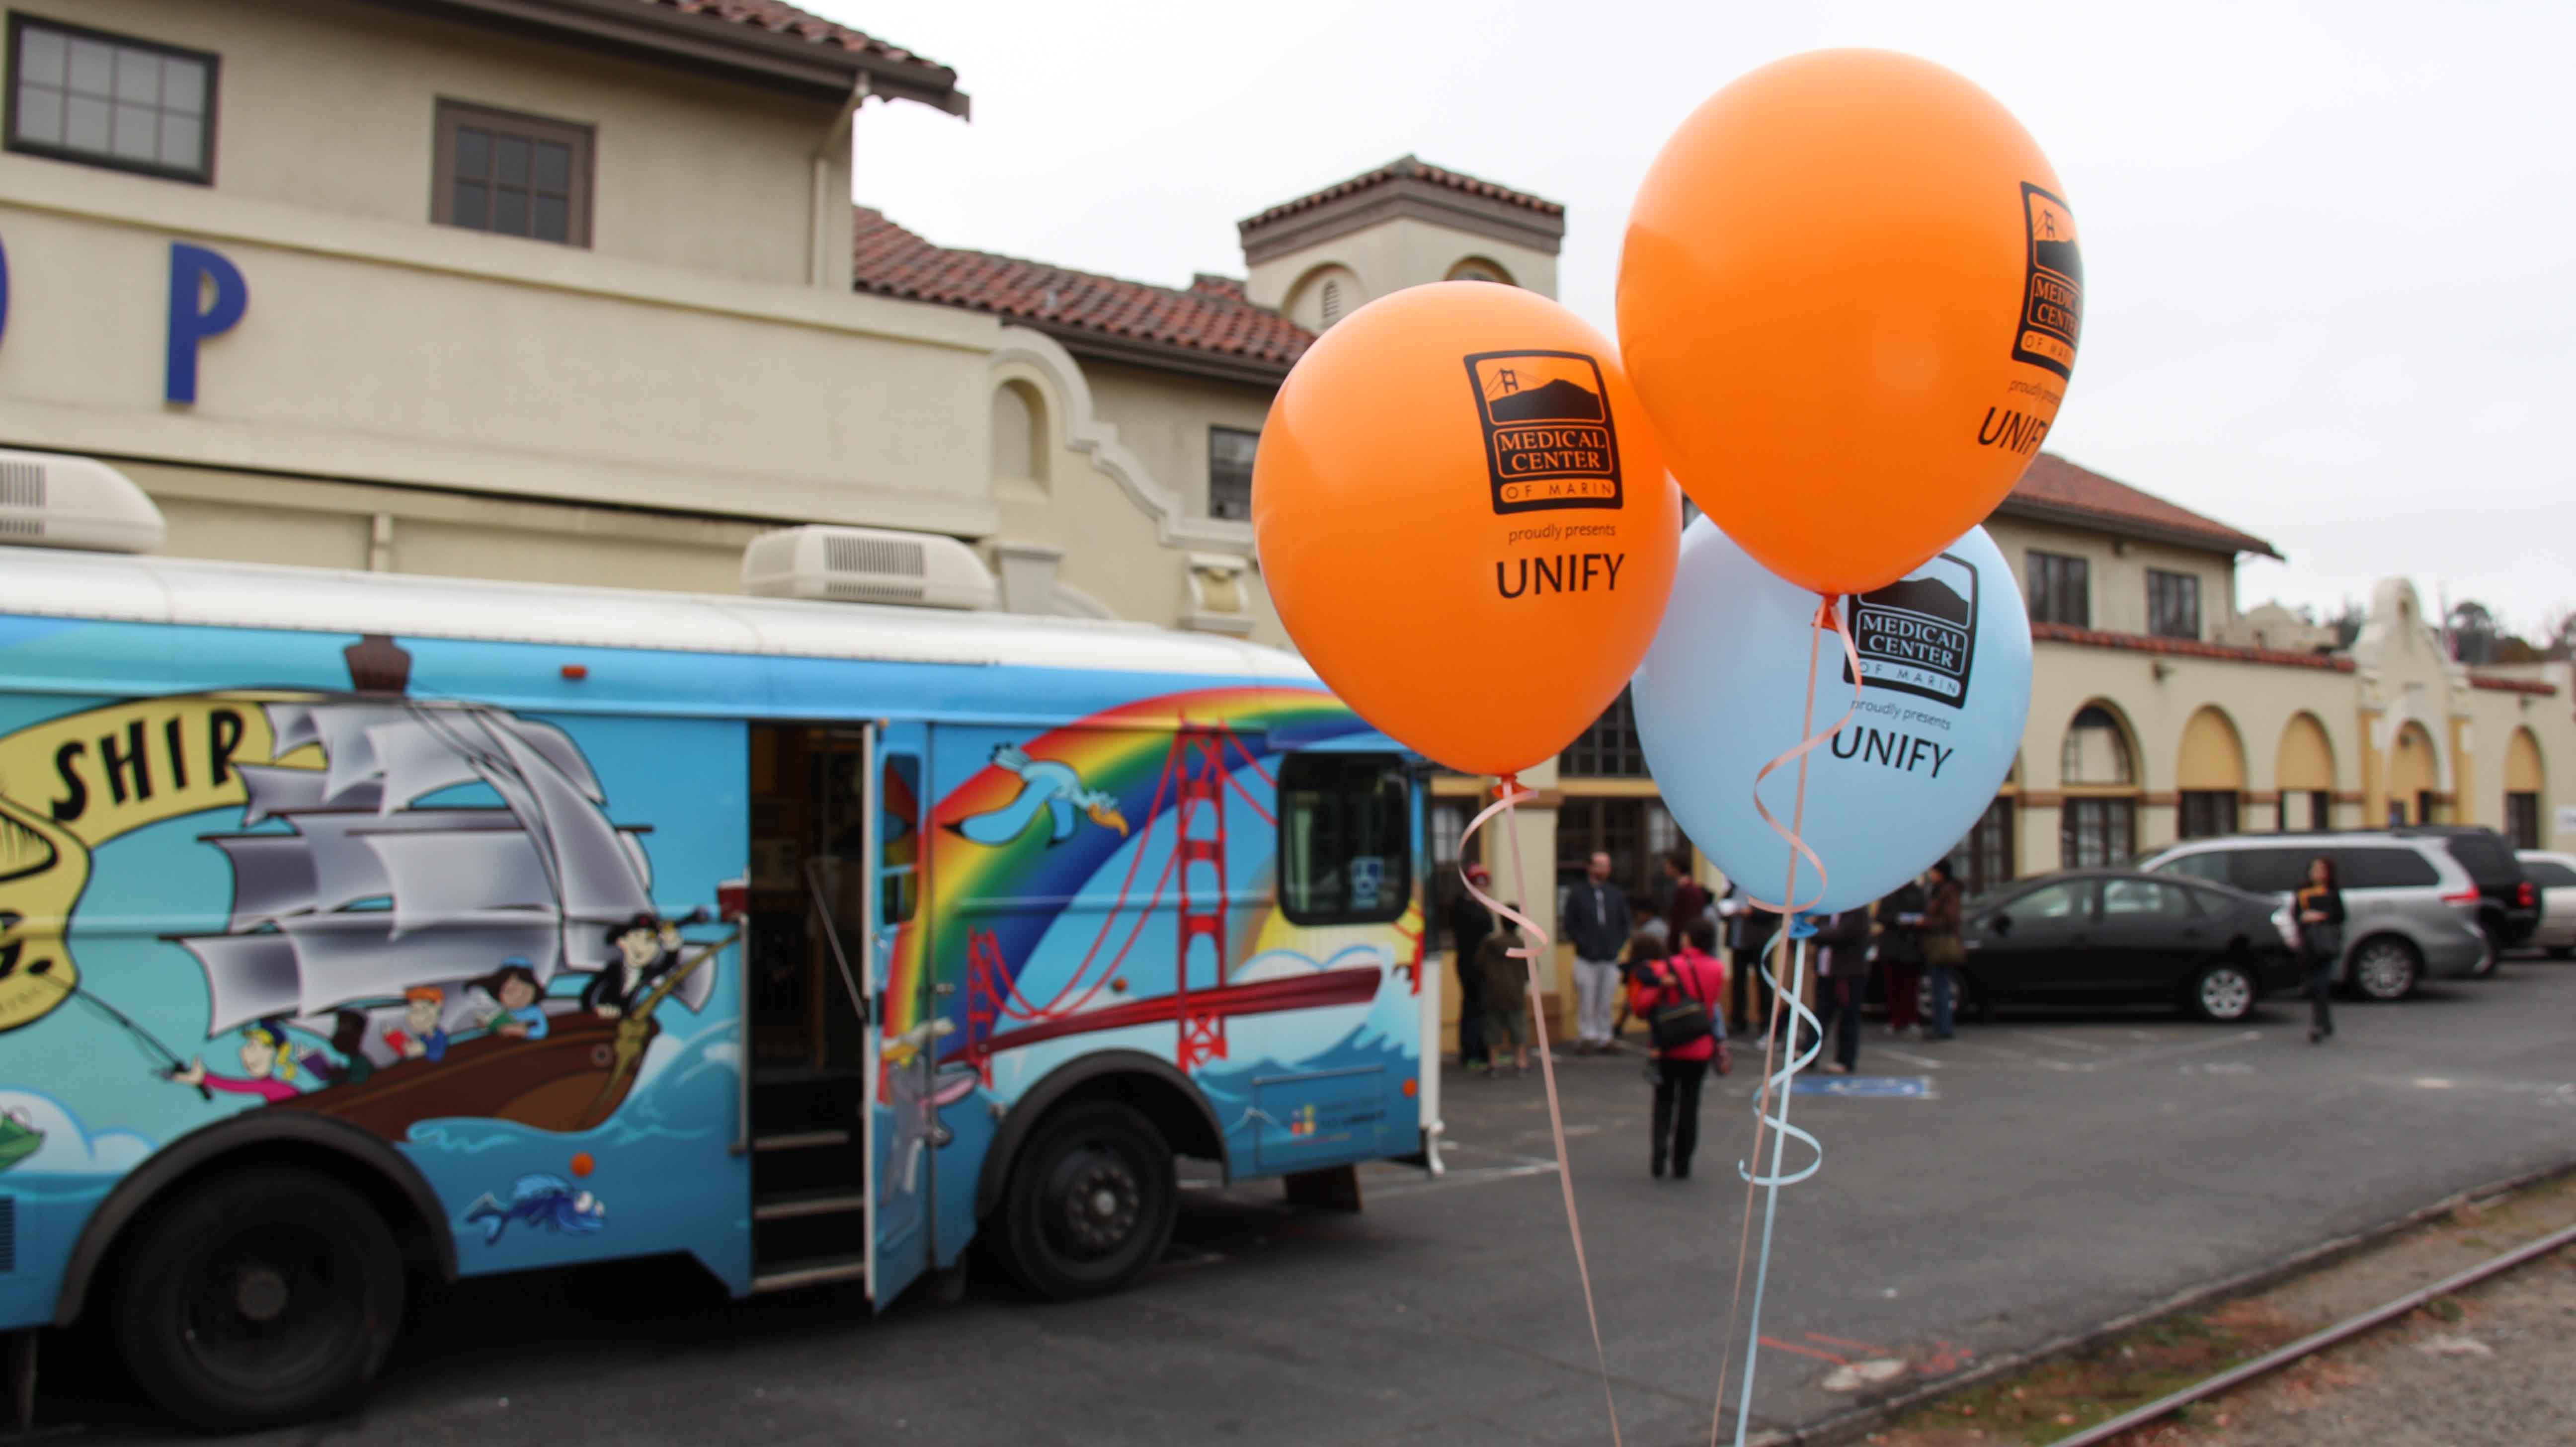 The Literacy Bus in Front of the event at Whistlestop